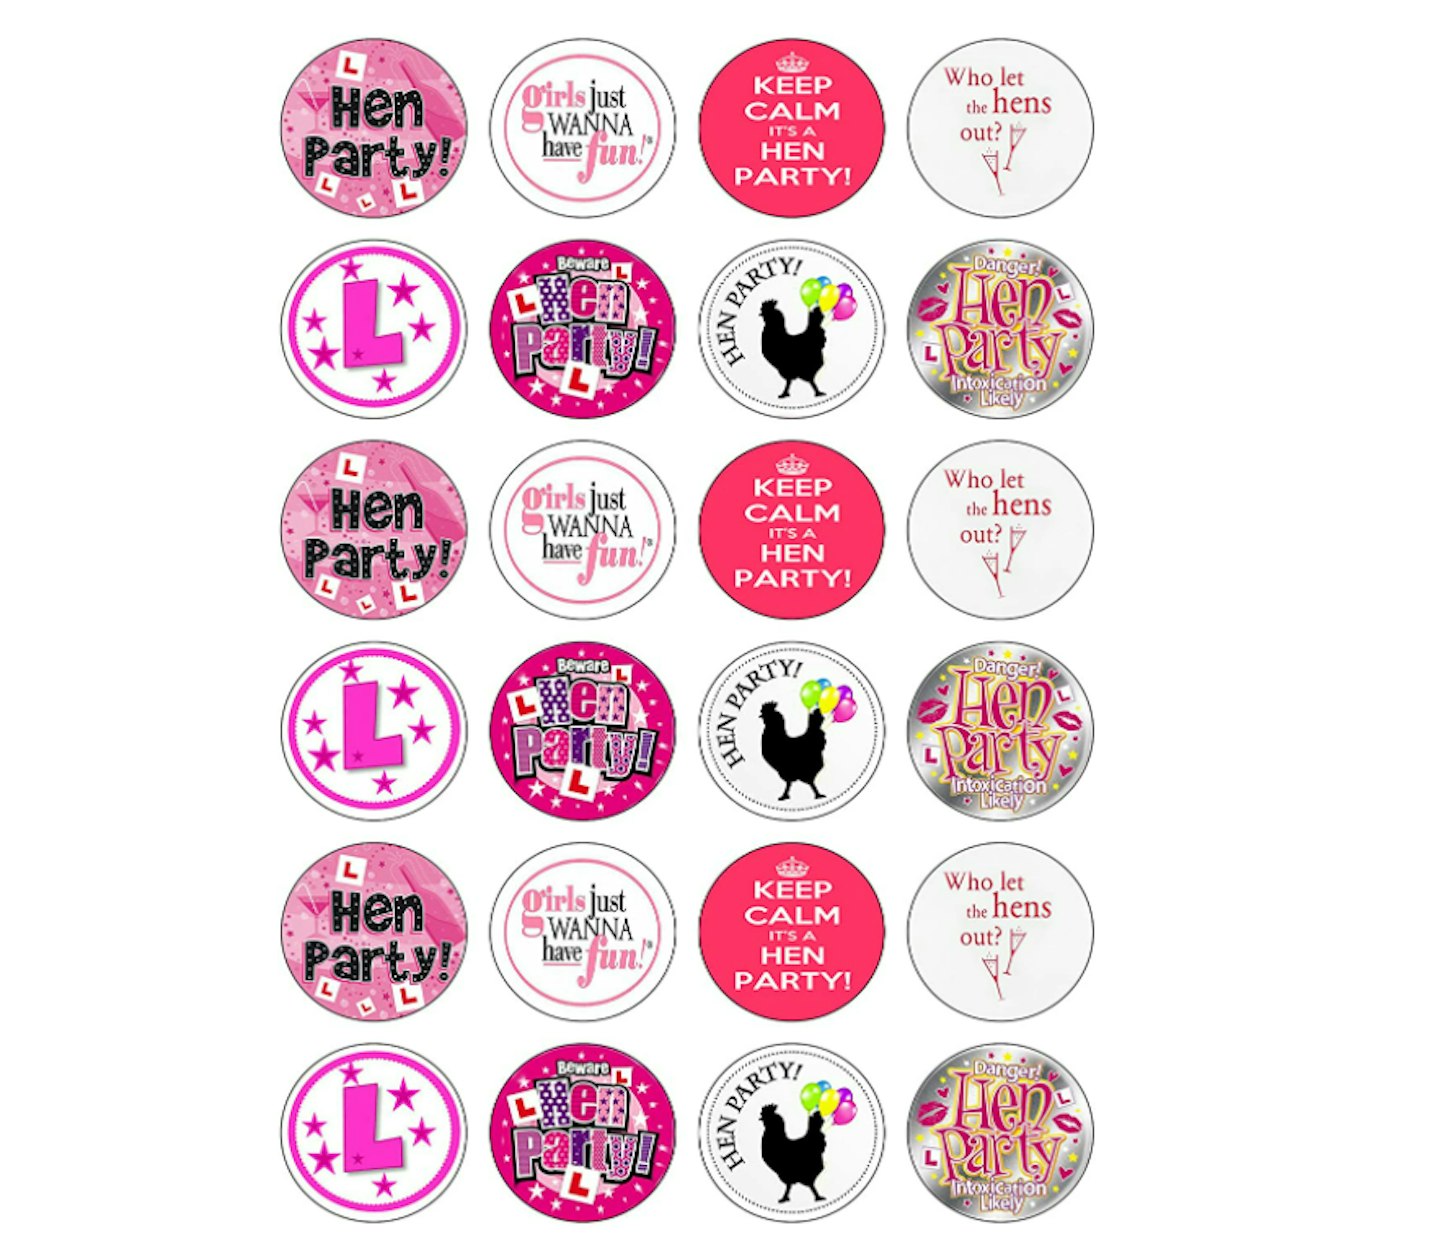 24 Precut Hen Party Edible Wafer Paper Cake Toppers Decorations